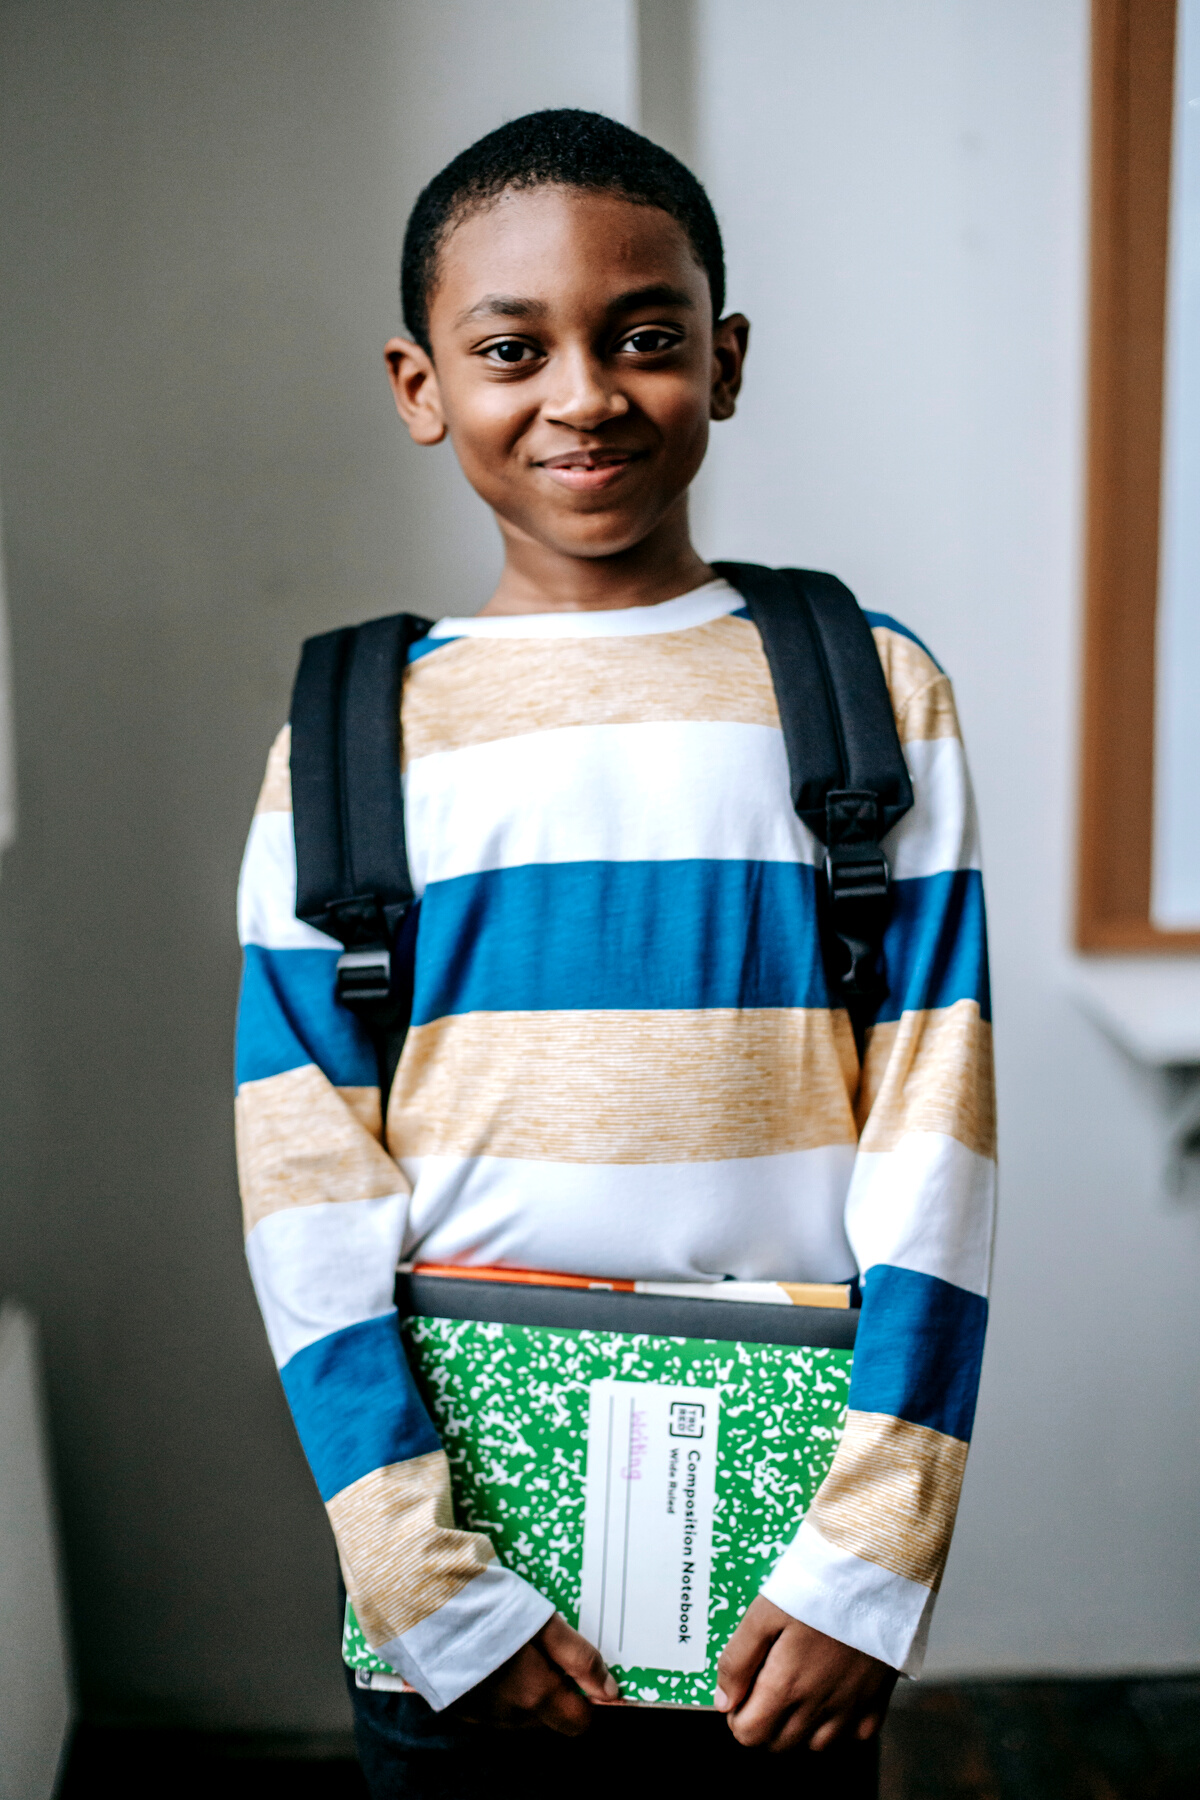 Smiling black child standing in classroom and looking at camera